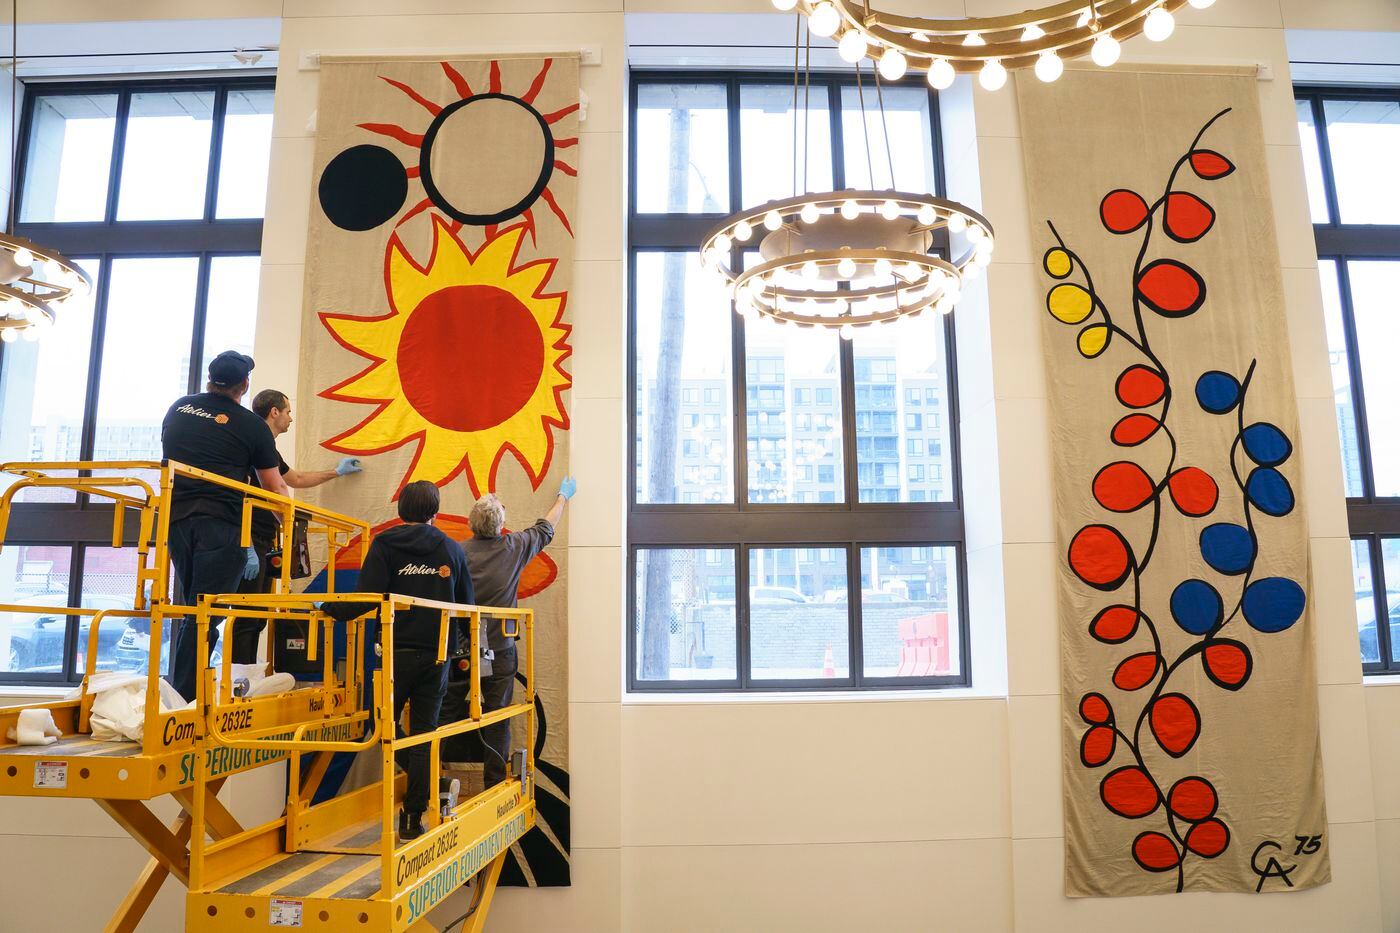 Banners created by Alexander Calder in the 1970s, lost and out of view for most of the last 35 years, are installed at the Free Library of Philadelphia last month.